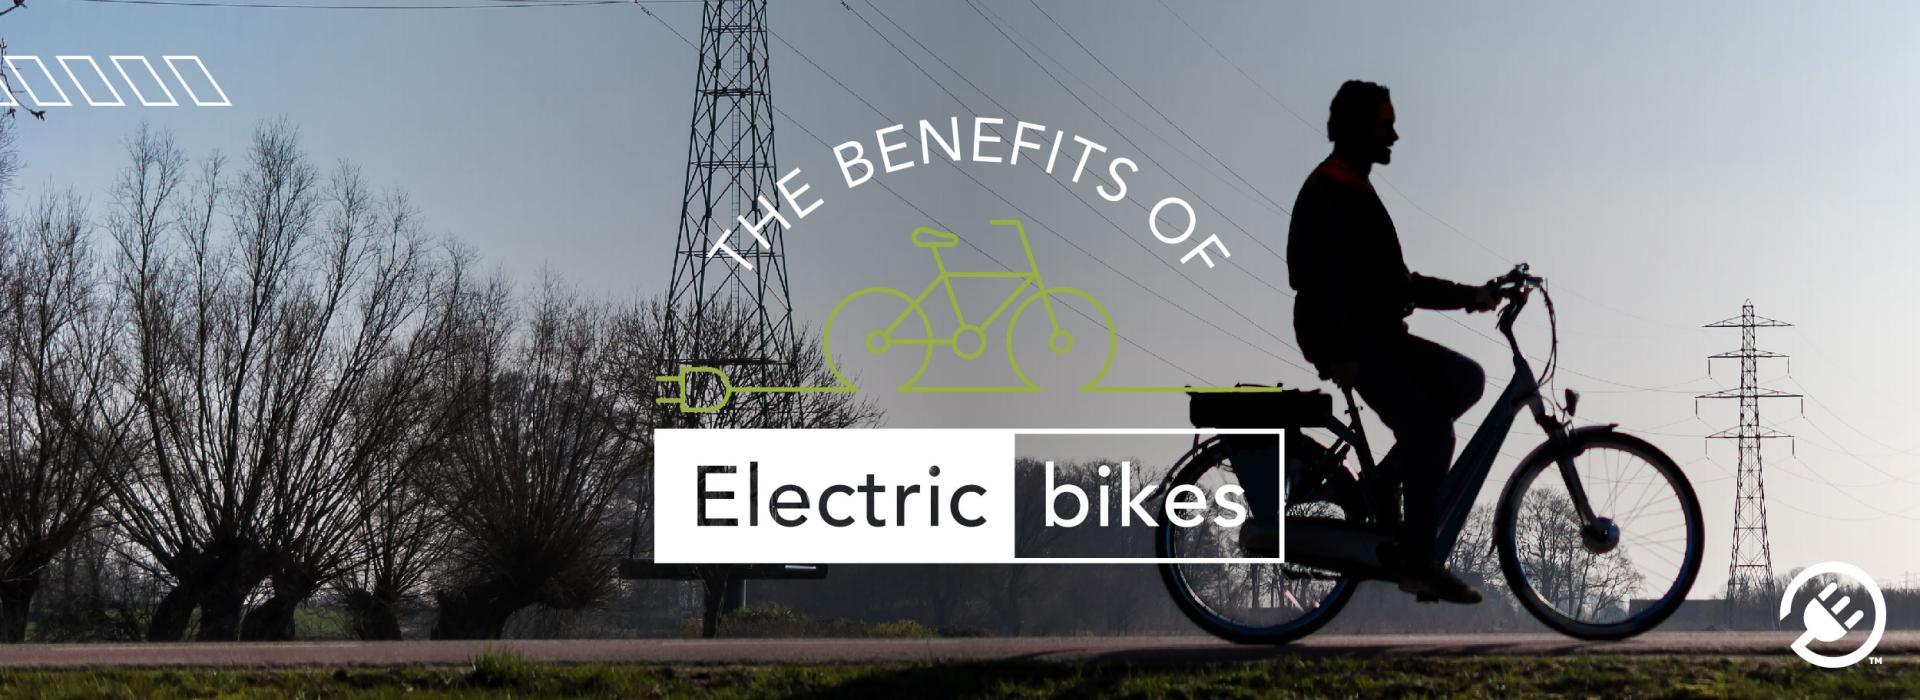 7 Great Benefits of Electric Bikes